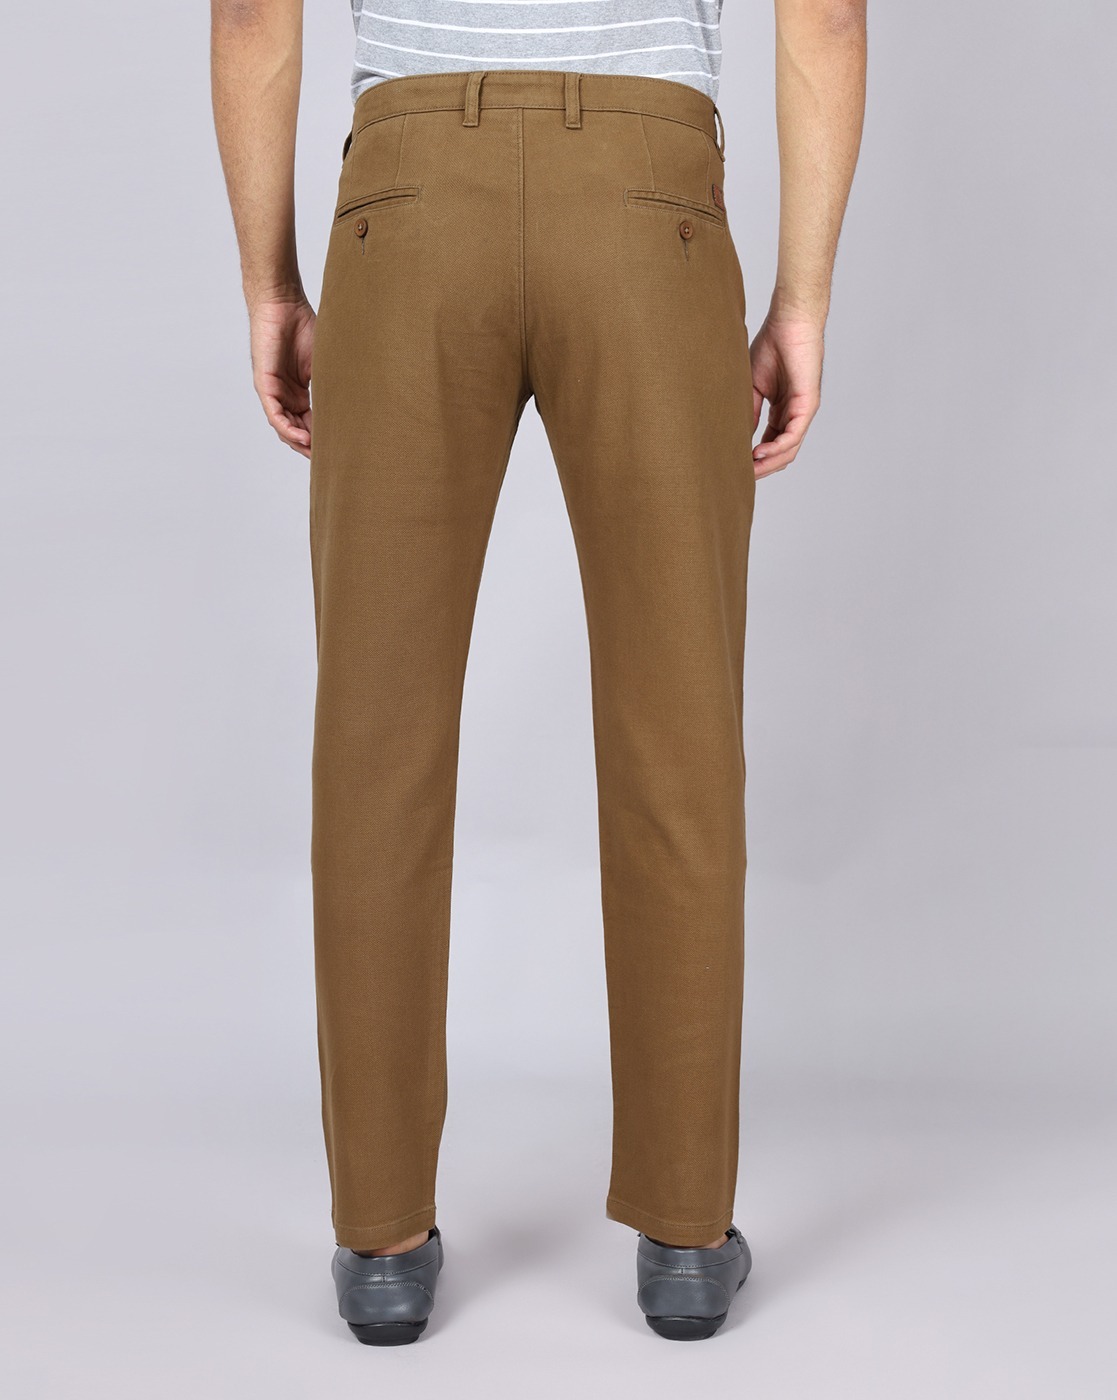 Tapered Tech Cargo Chino Pants for Boys | Old Navy